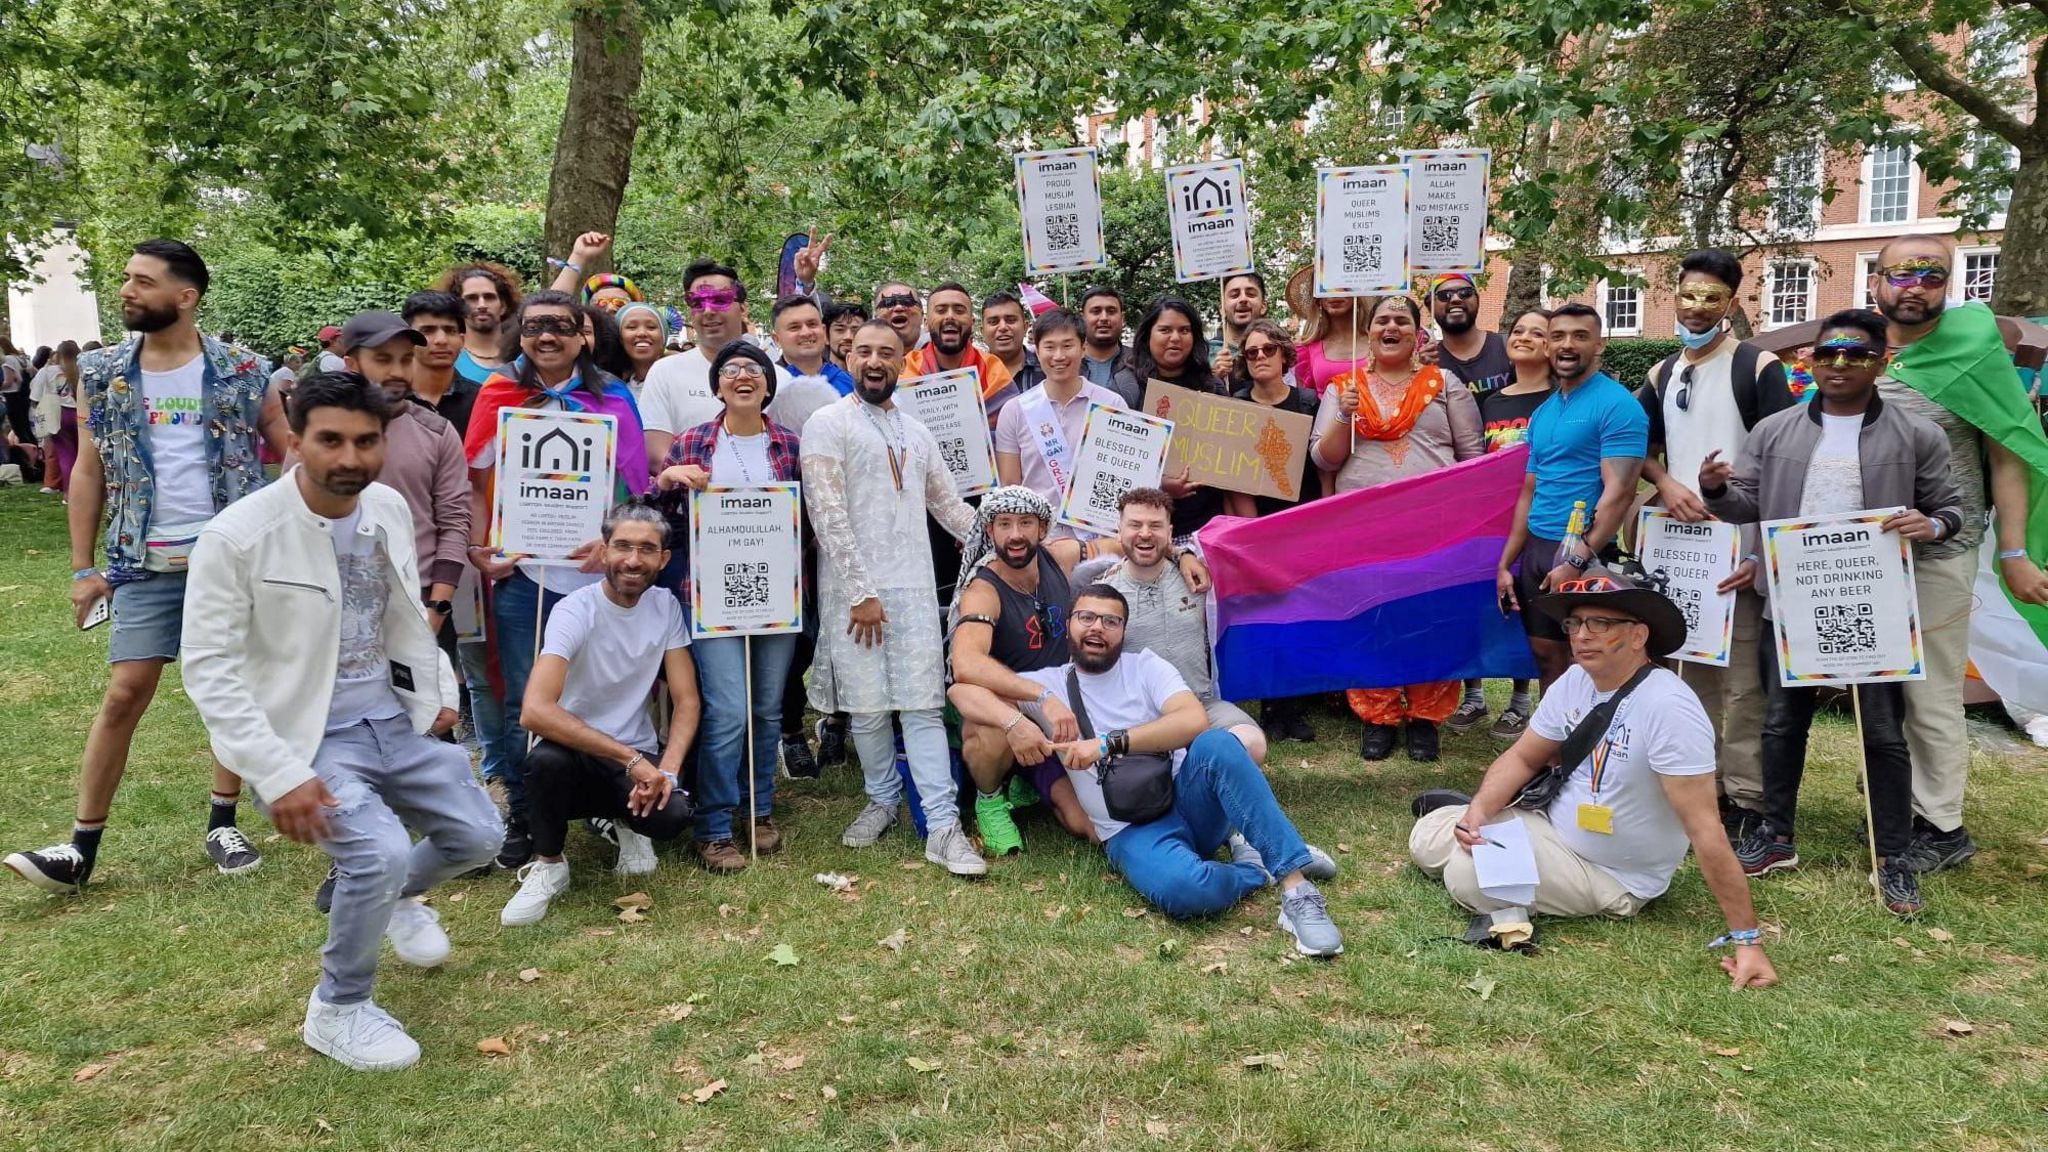 A group of members of Imaan LGBTQI+ gathered on a grassy area, holding placards and flags at Pride in London last year